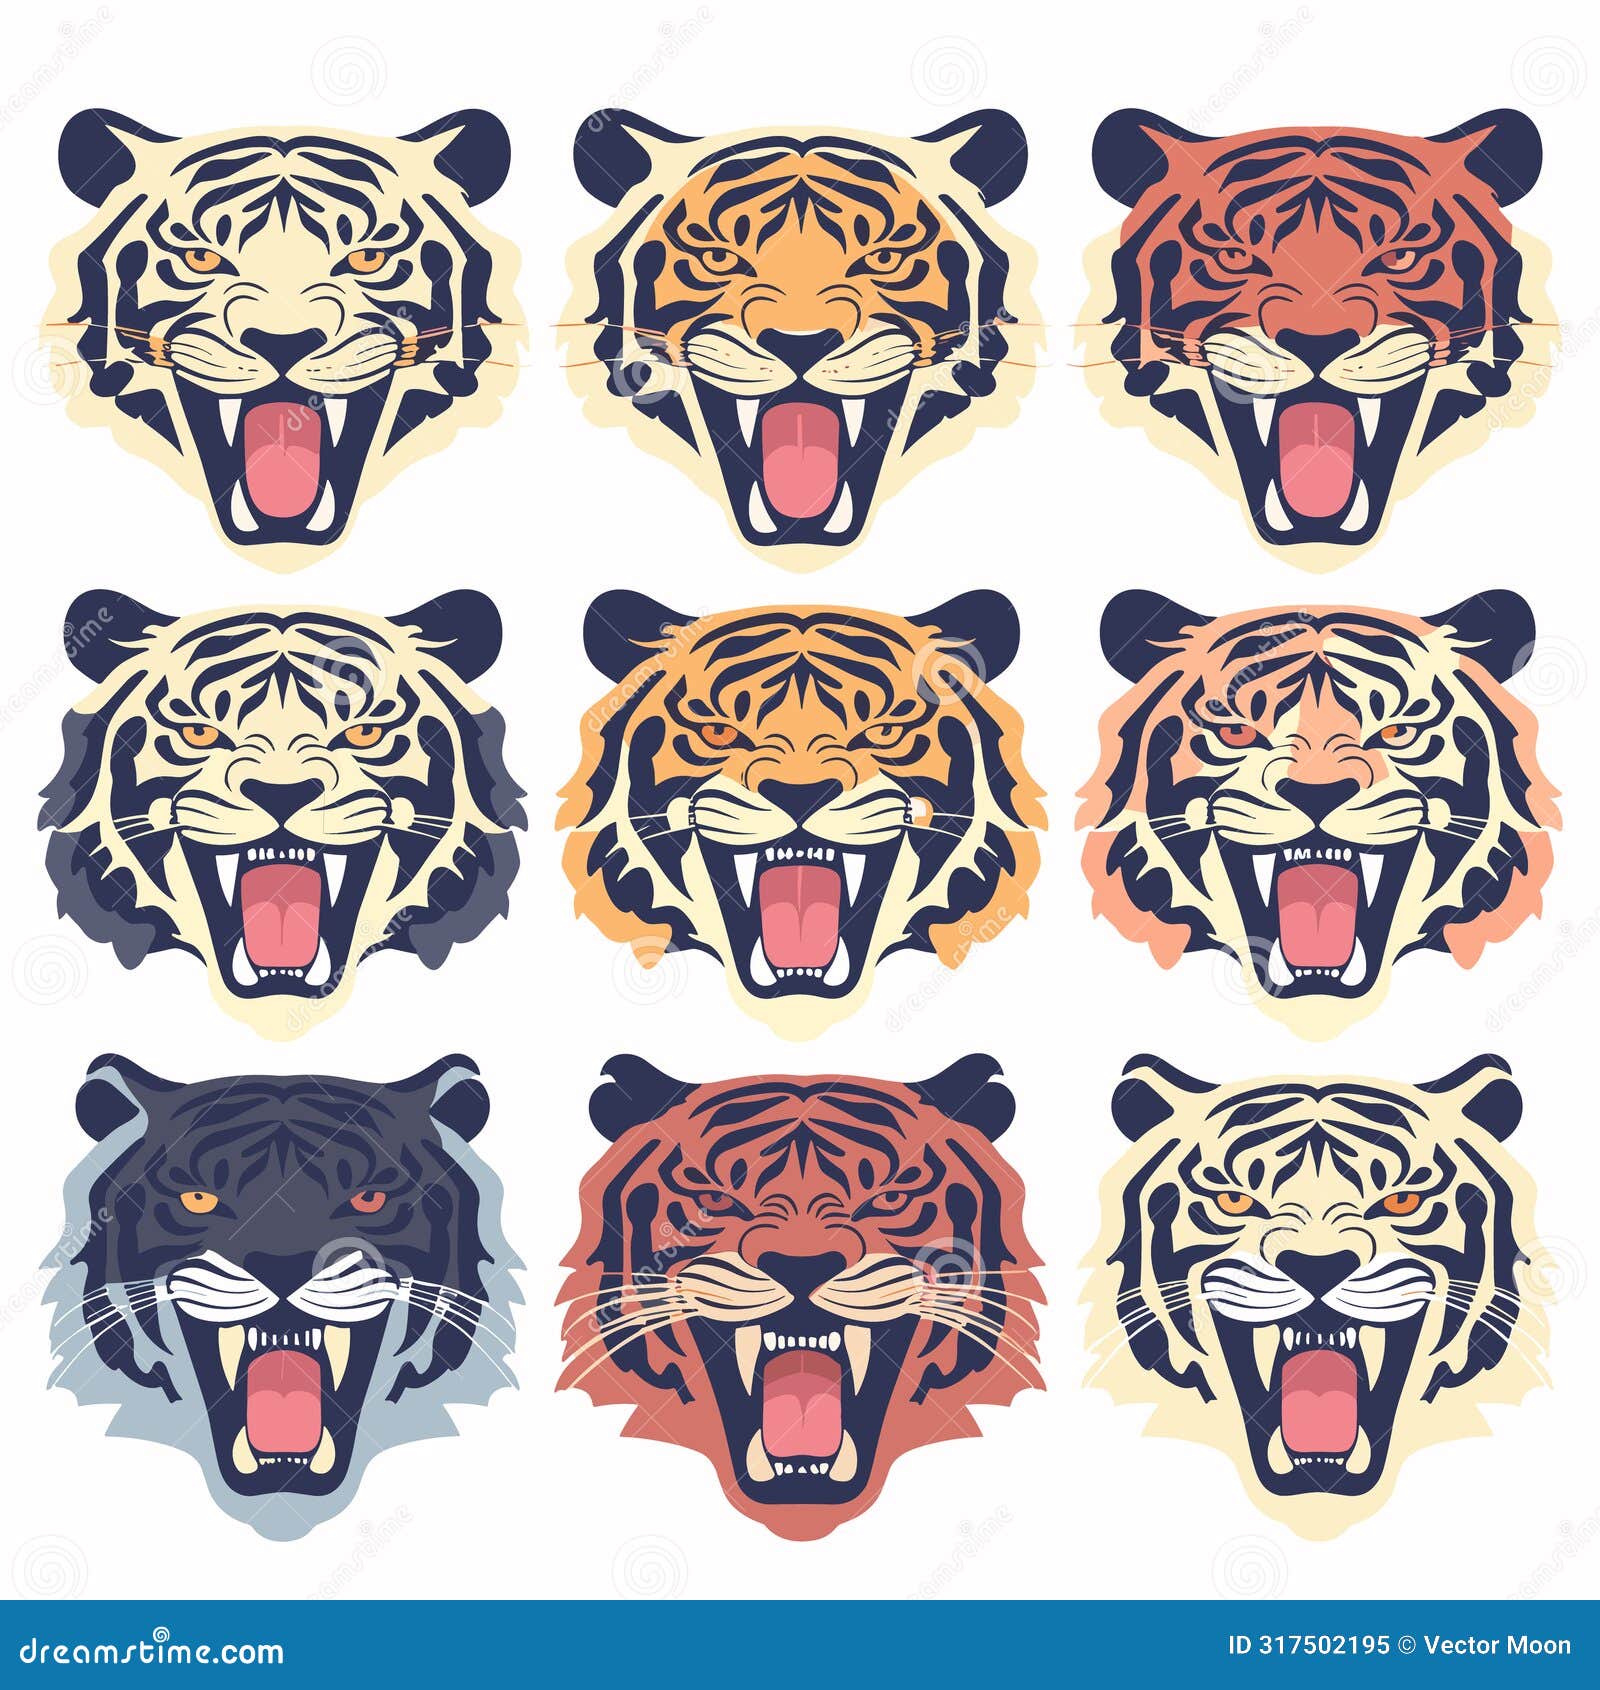 collection nine tiger faces, showcasing different styles colors, tiger exhibits fierce expression